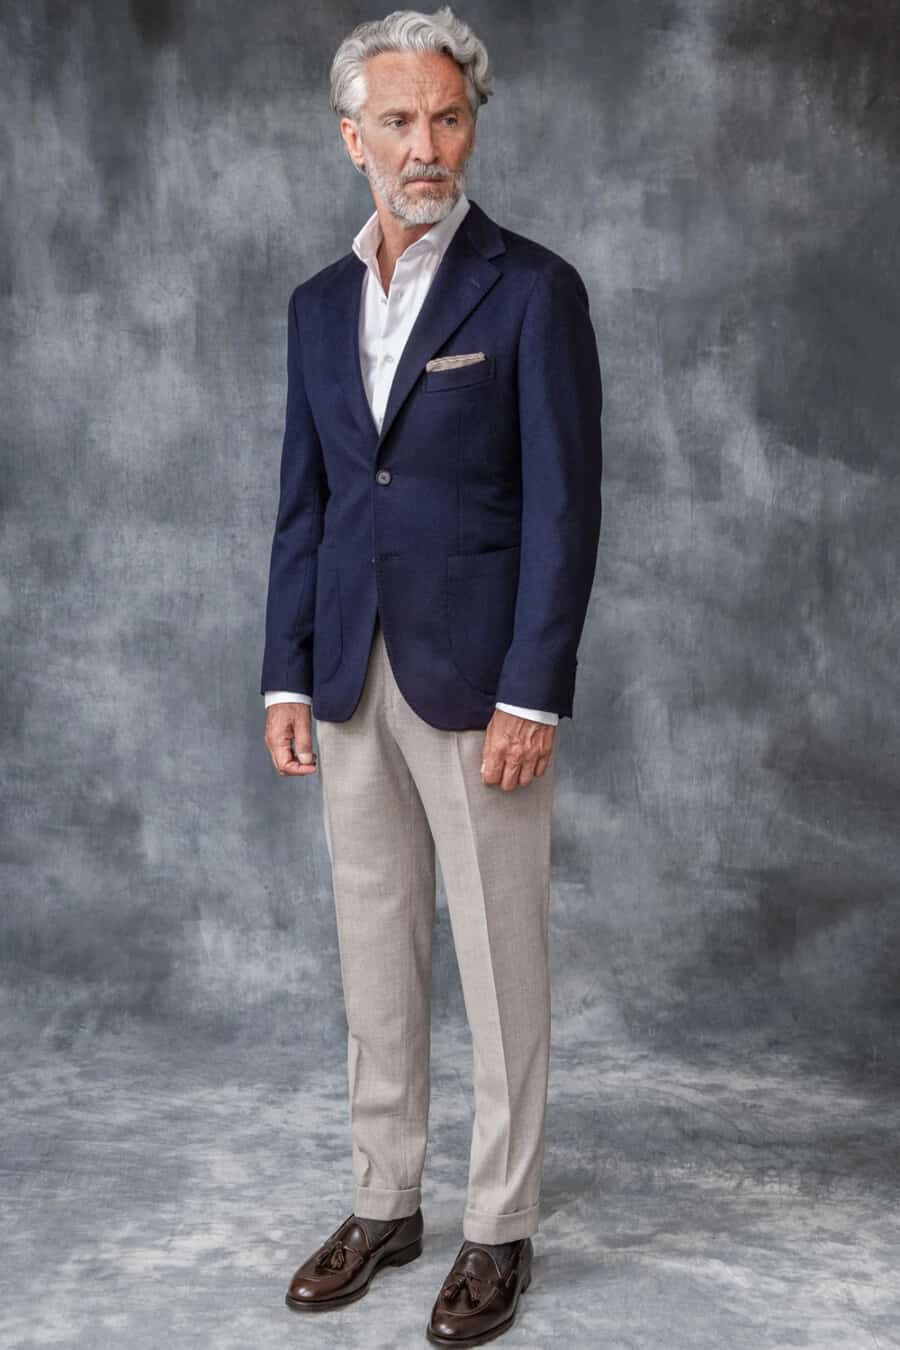 Men's navy blazer, white shirt, light grey tailored pants, grey socks and brown leather tassel loafers outfit